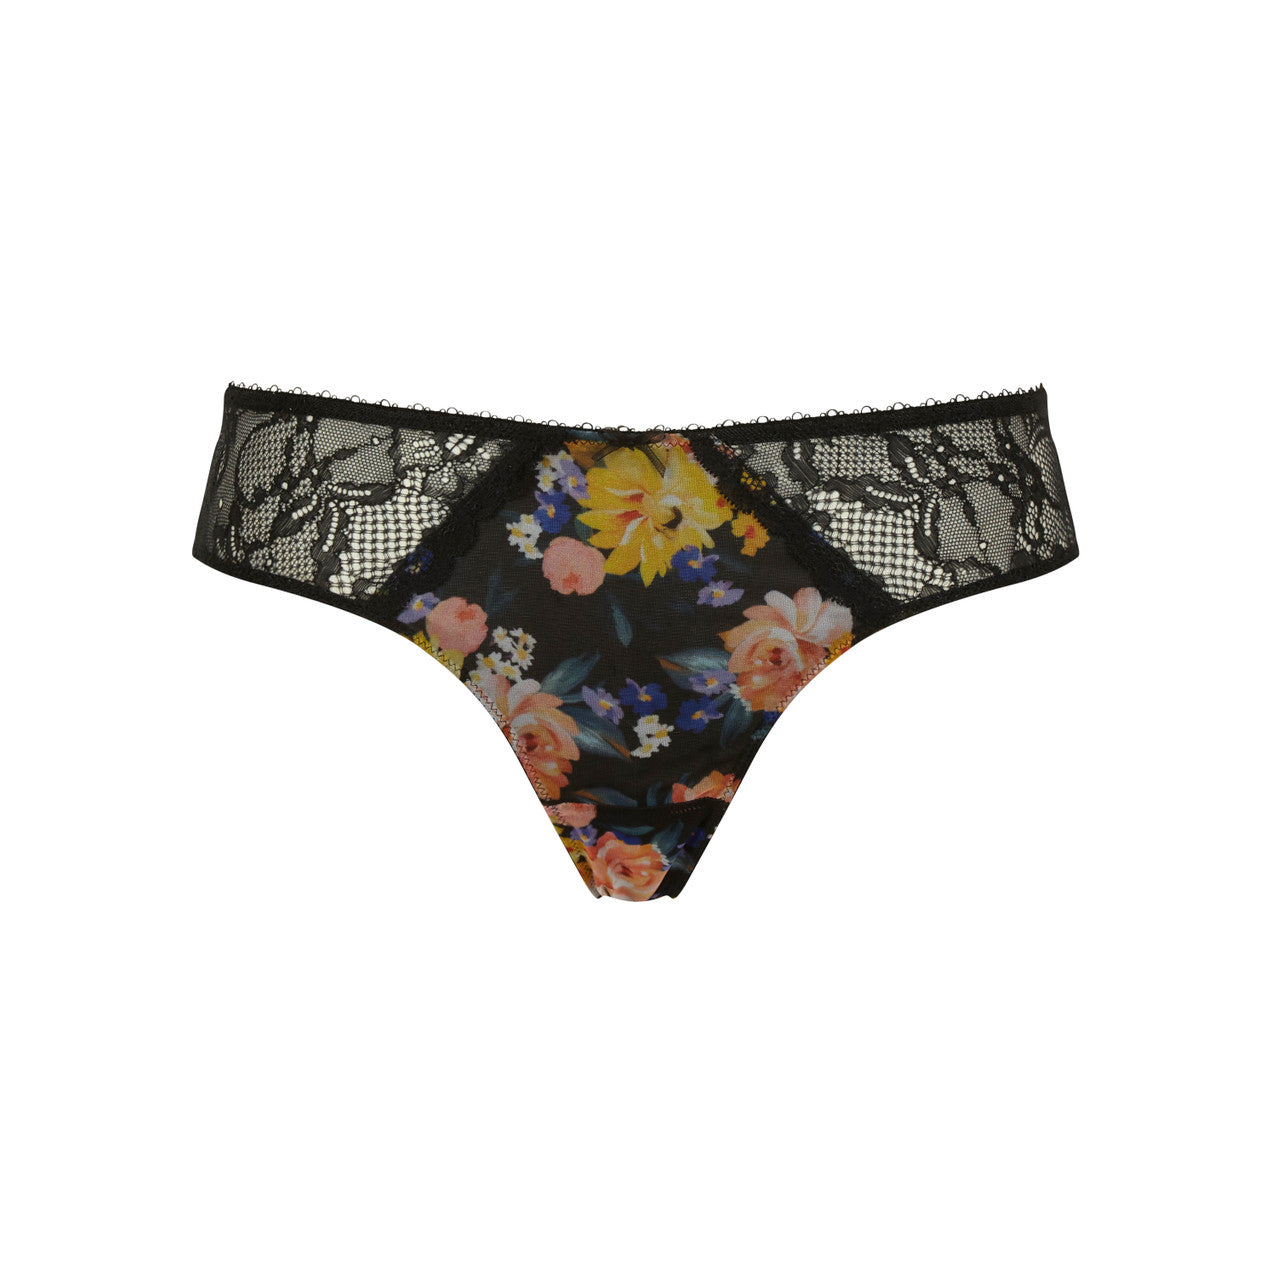 Jasmine Brazilian Brief - Bloom front view product image